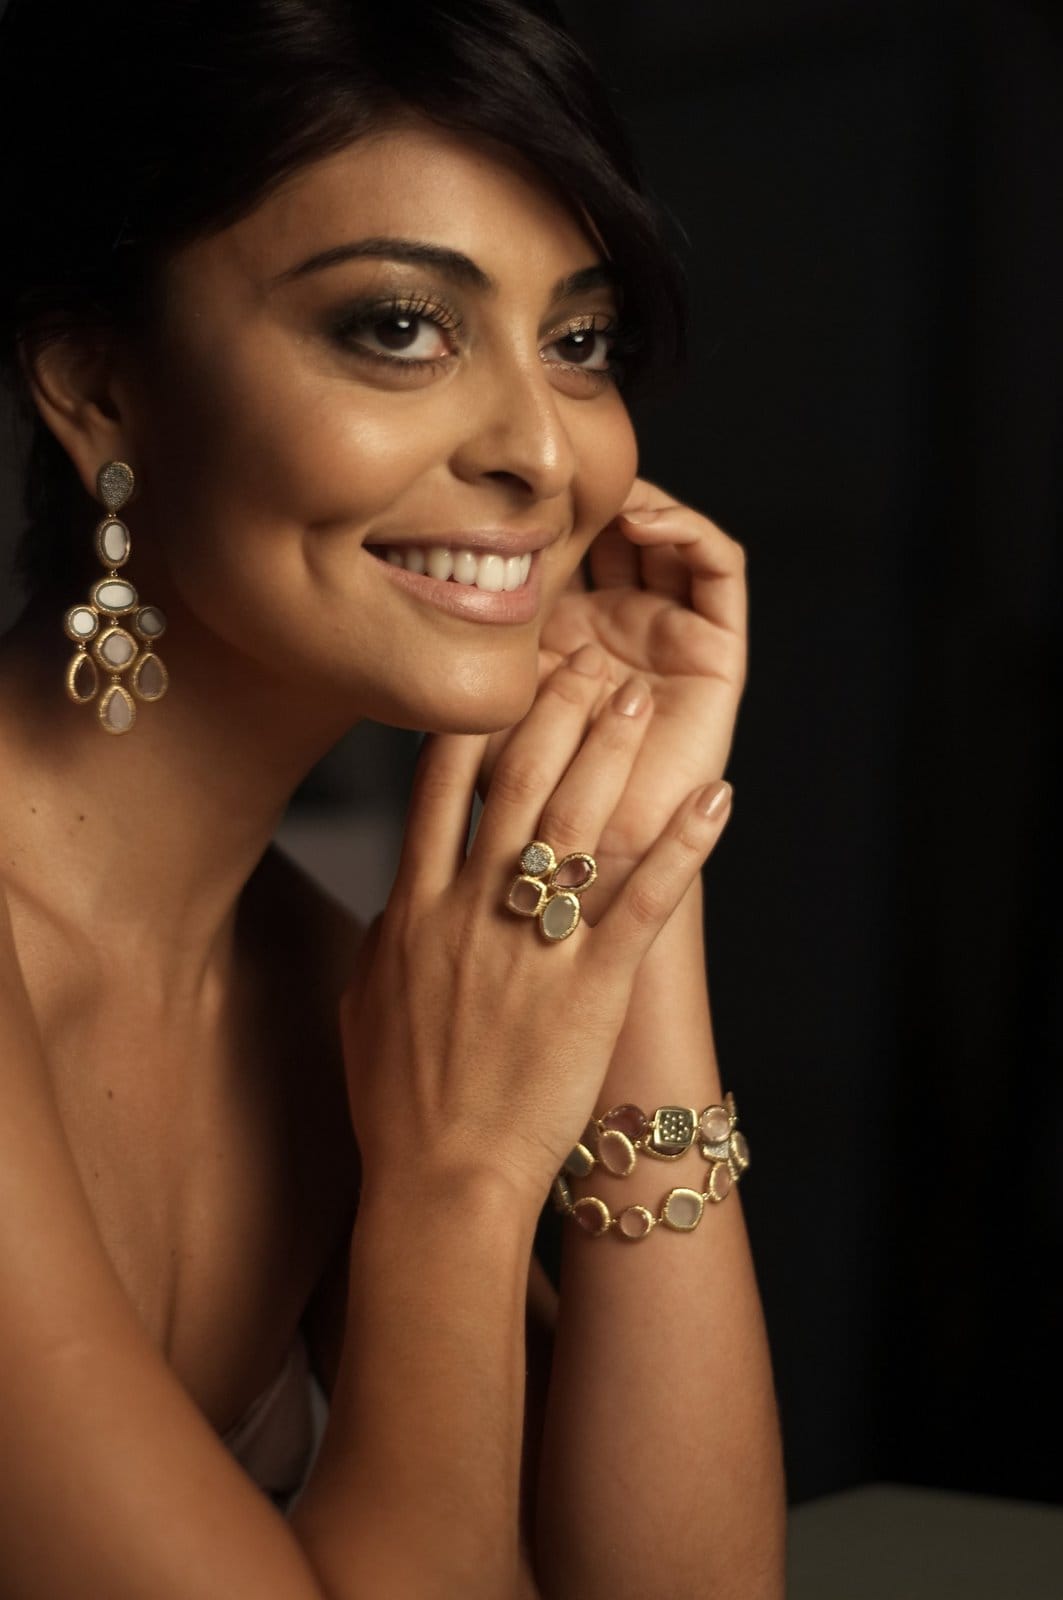 Picture Of Juliana Paes